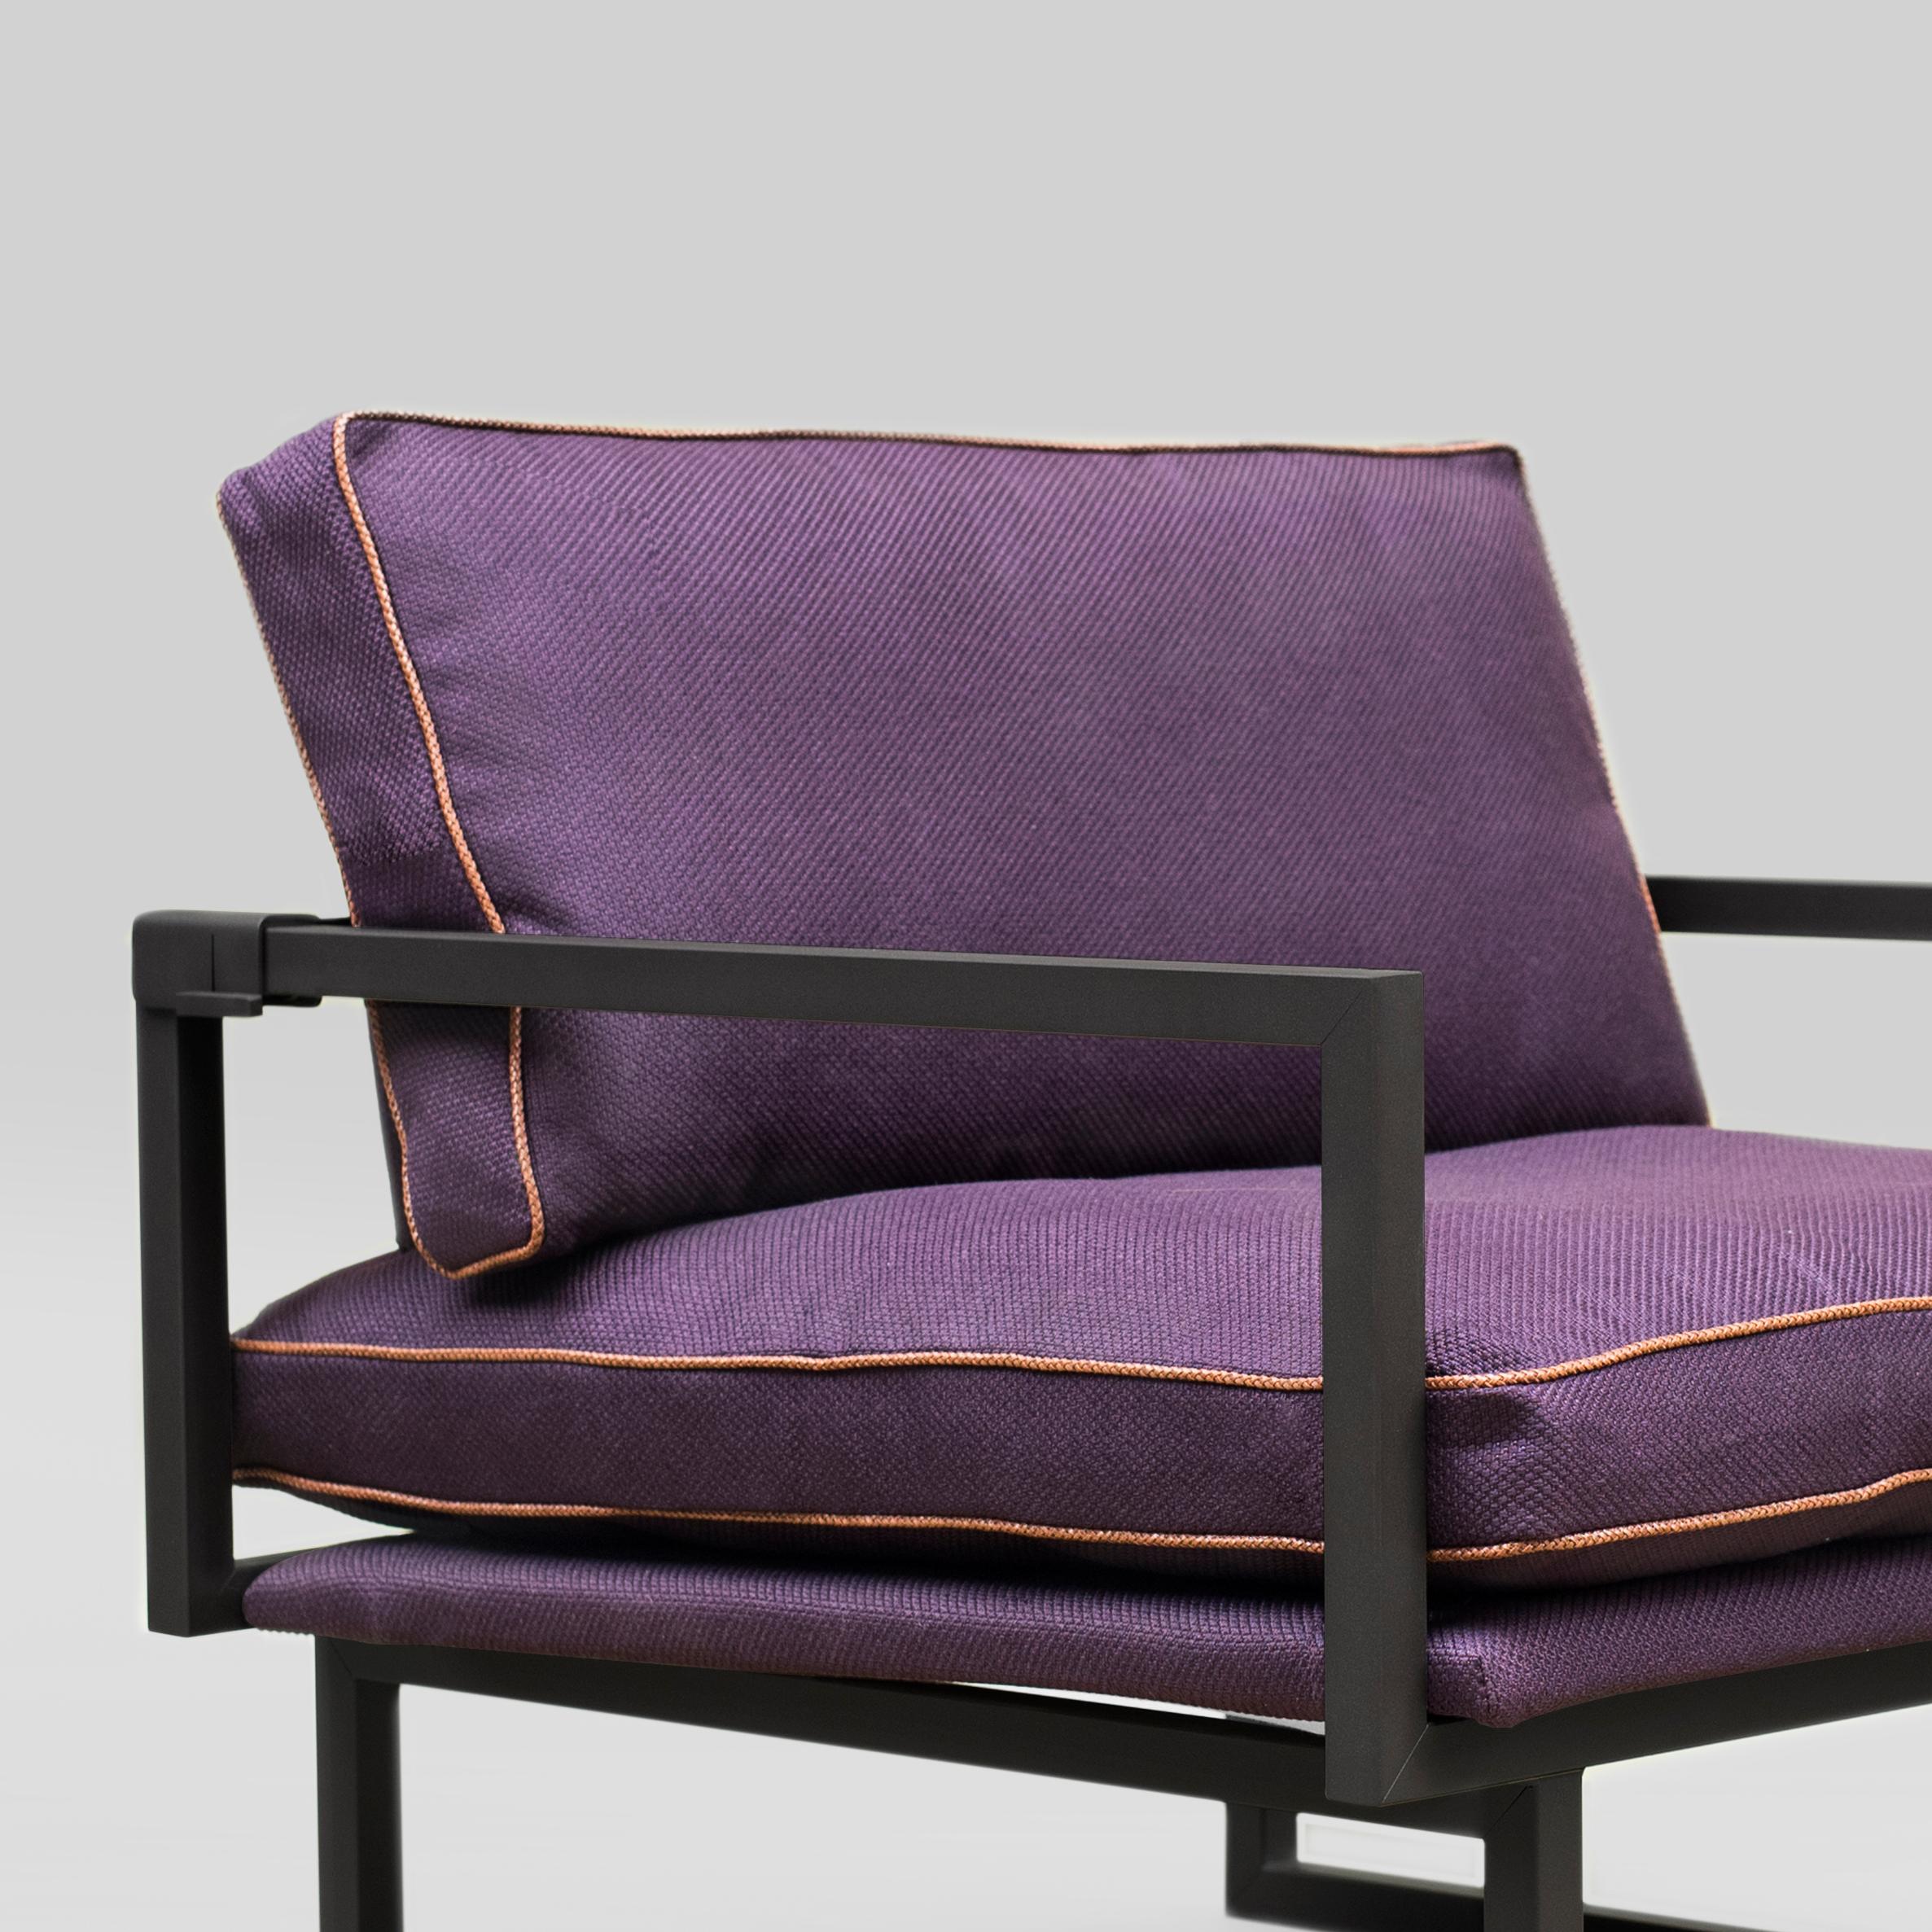 Armchair designed by Peter Ghyczy.
Manufactured by Ghyczy (Netherlands)

Frame Ristretto
Fabric V/11 (Q4)
Piping D ‘own color’

Dimensions:
L 86 x W 90 x SH 41 


This sofa has an airy and light weight architectural construction. The GP01